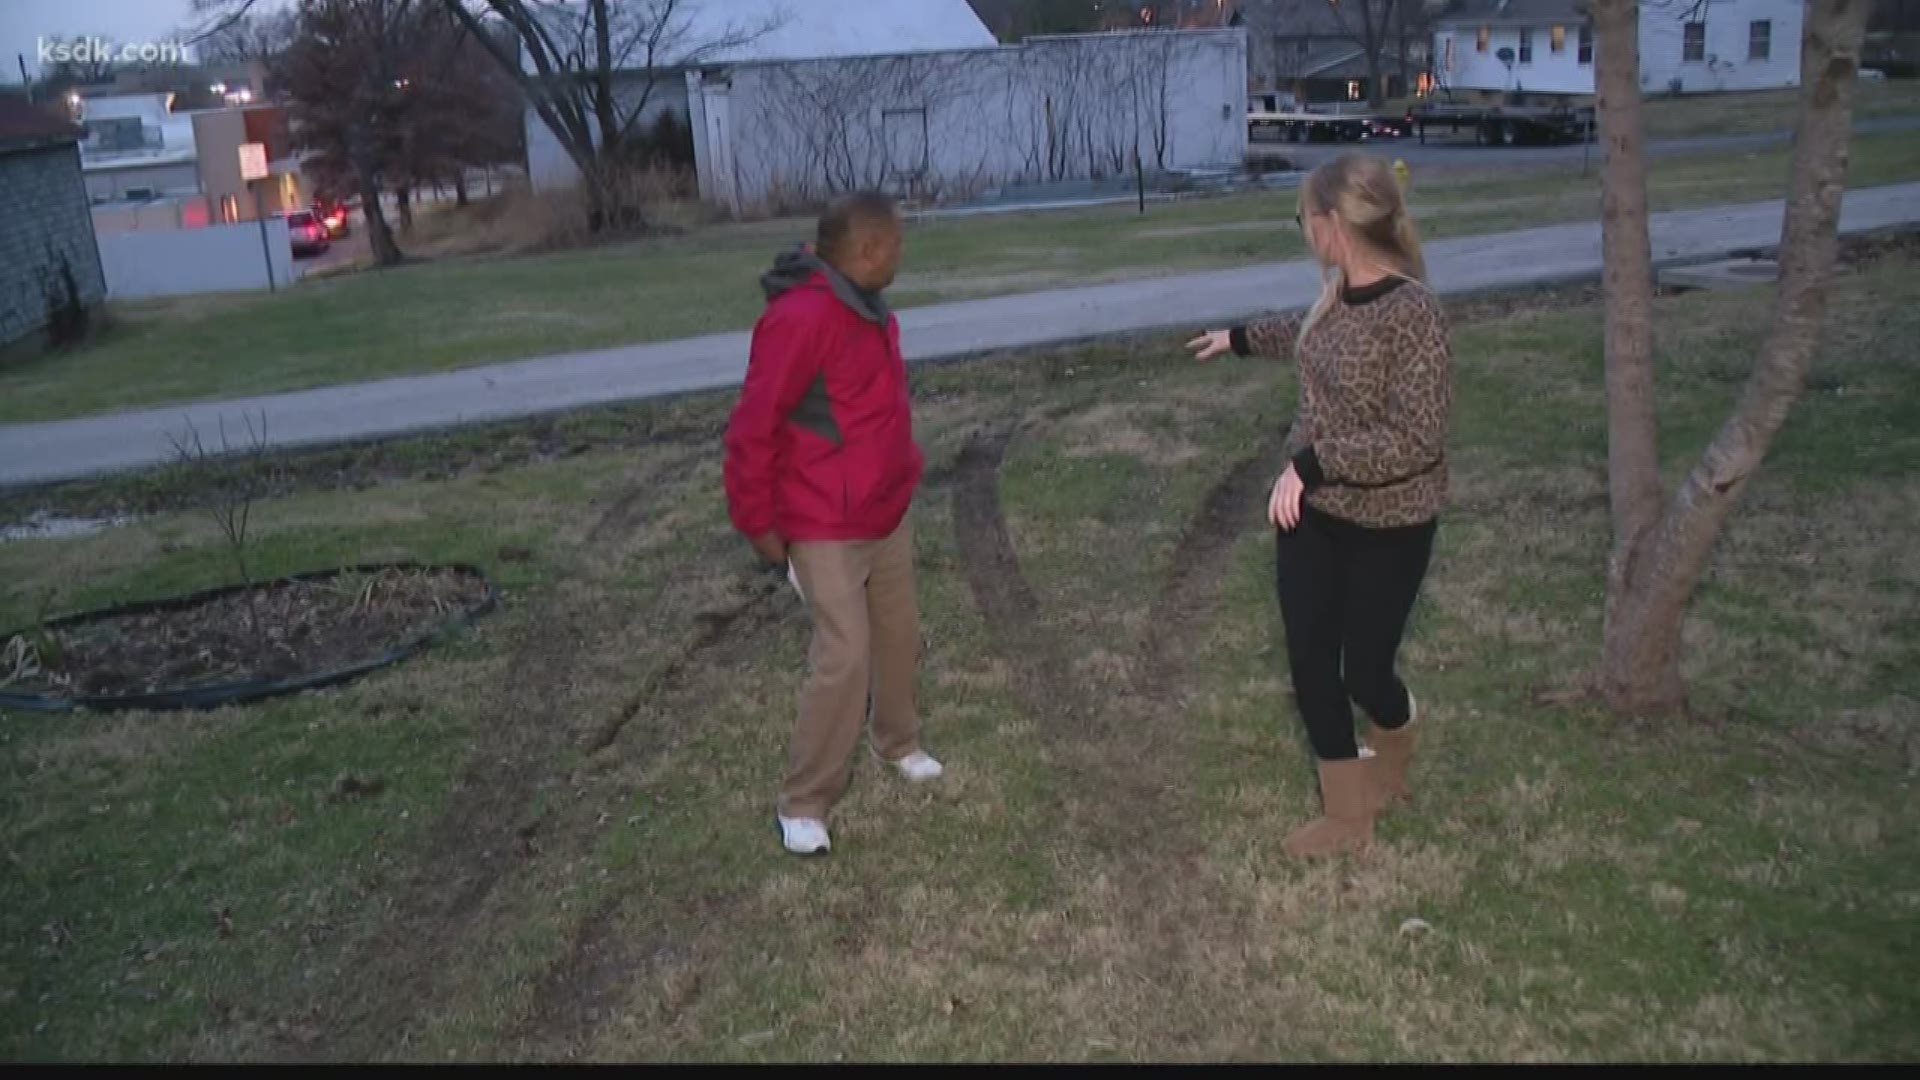 A Wentzville woman still can't believe on New Year's Day two suspected carjackers on the run from police narrowly missed hitting her home